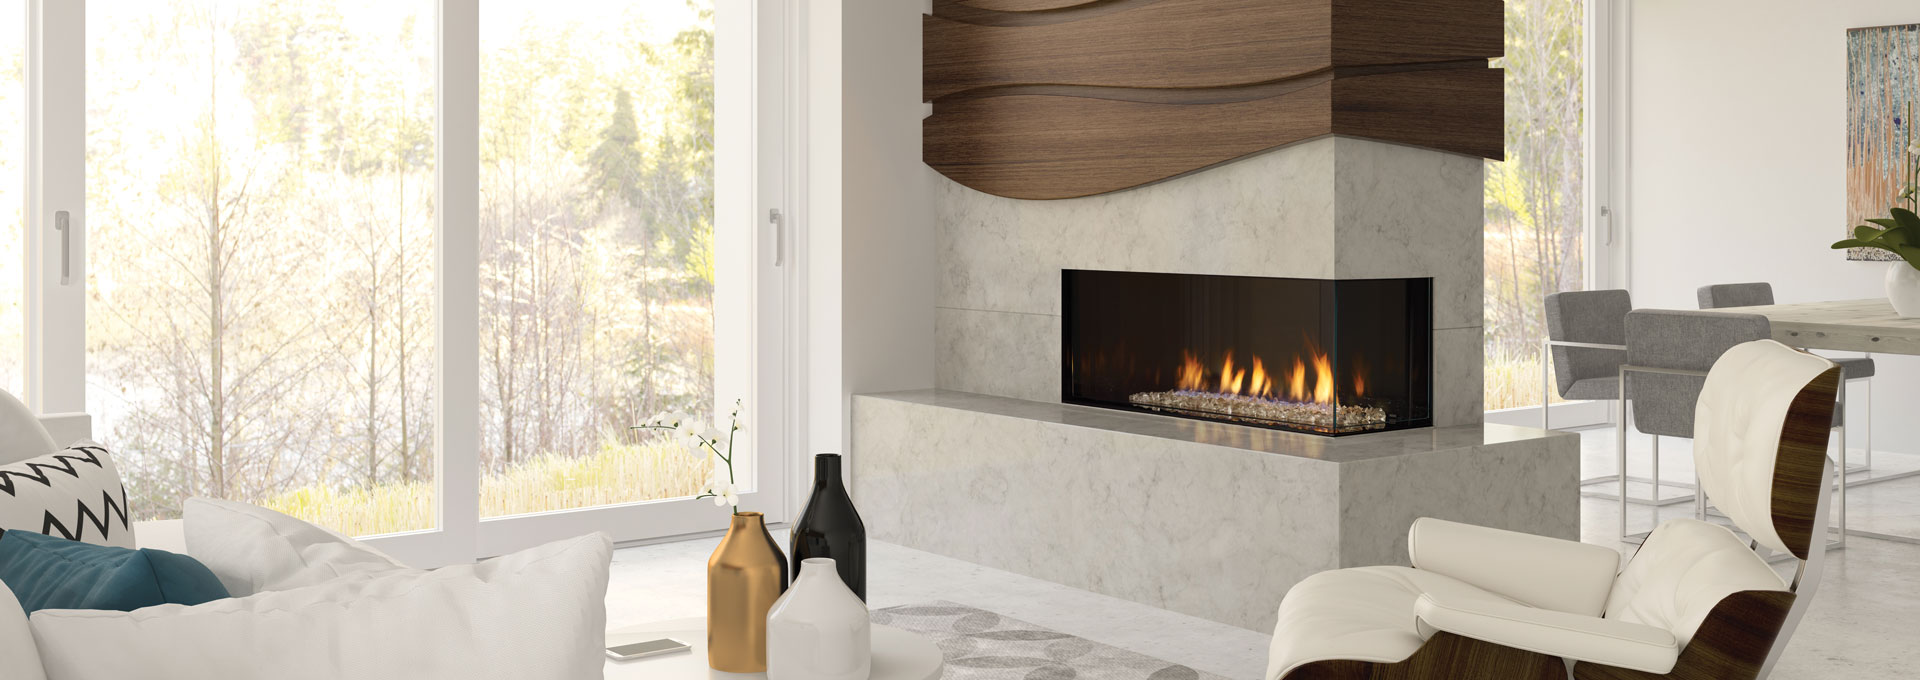 The Regency City Series Chicago Corner Right two sided gas fireplace allows you to have design flexibility creating multiple views from either side of the room.